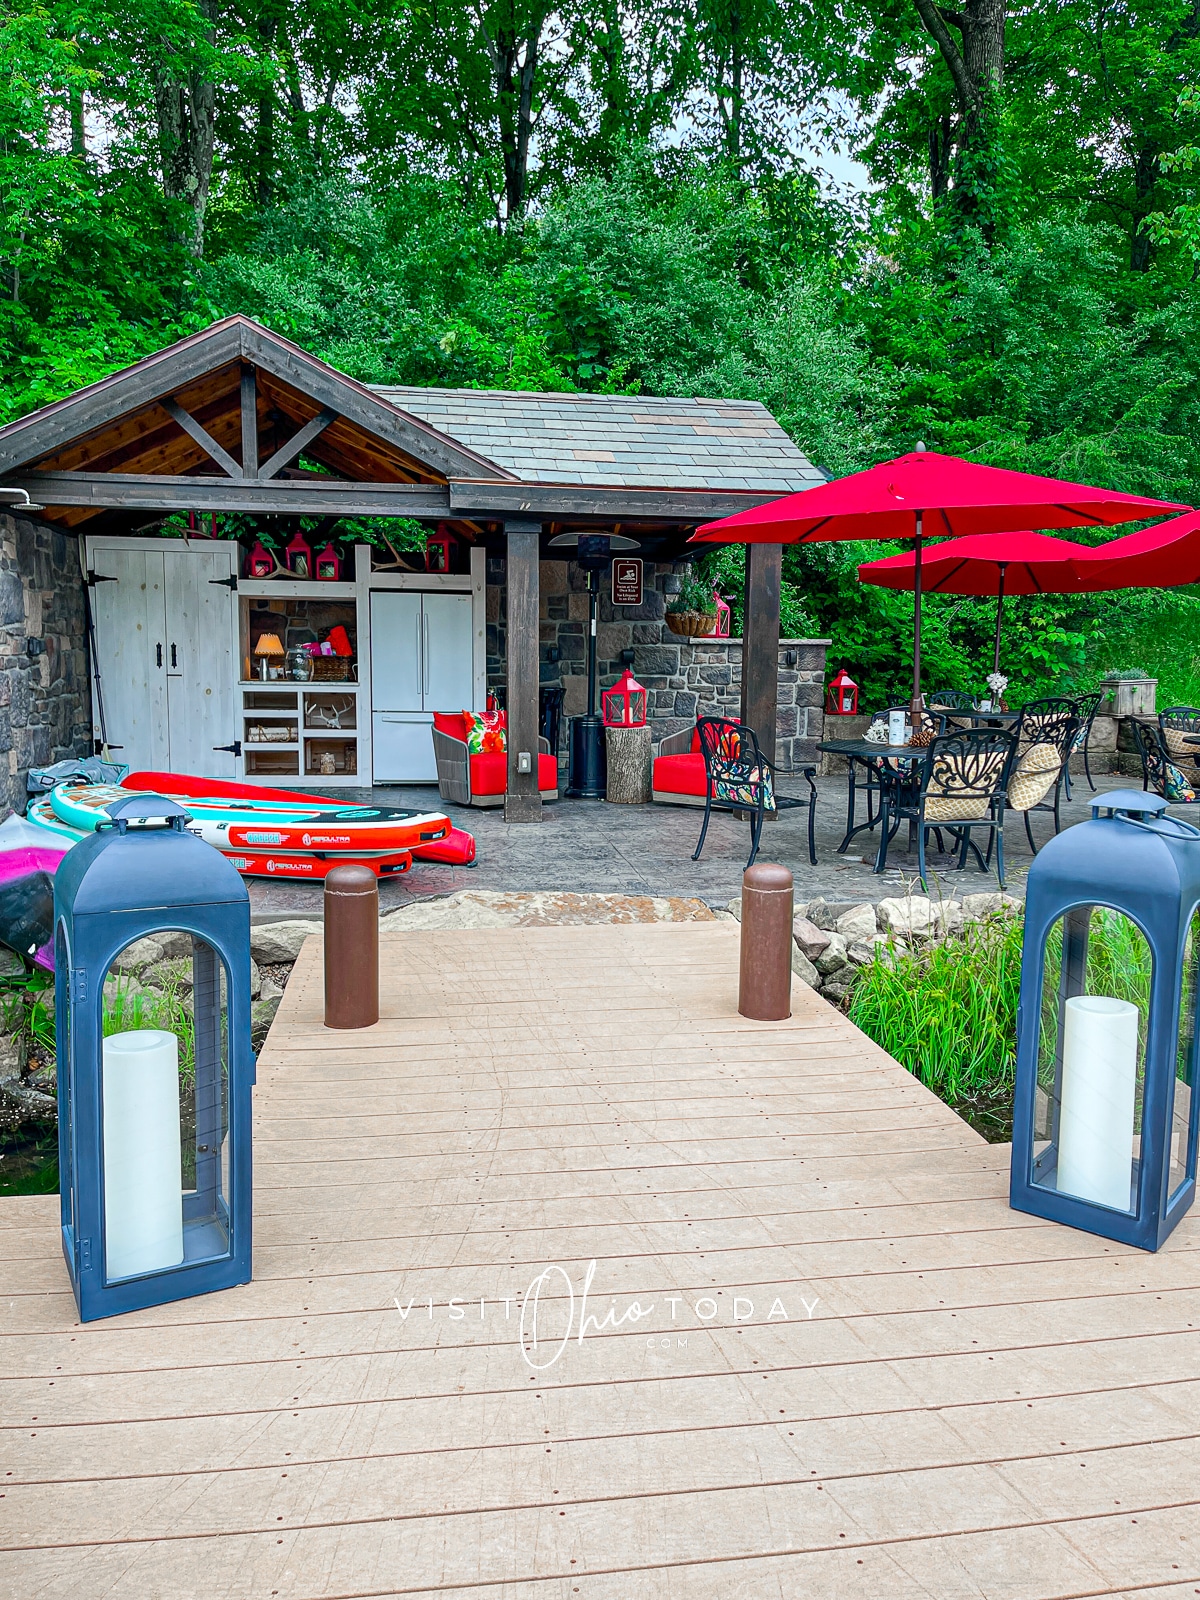 Outside dining area with some paddleboards stacked to the side.The tables have red parasols